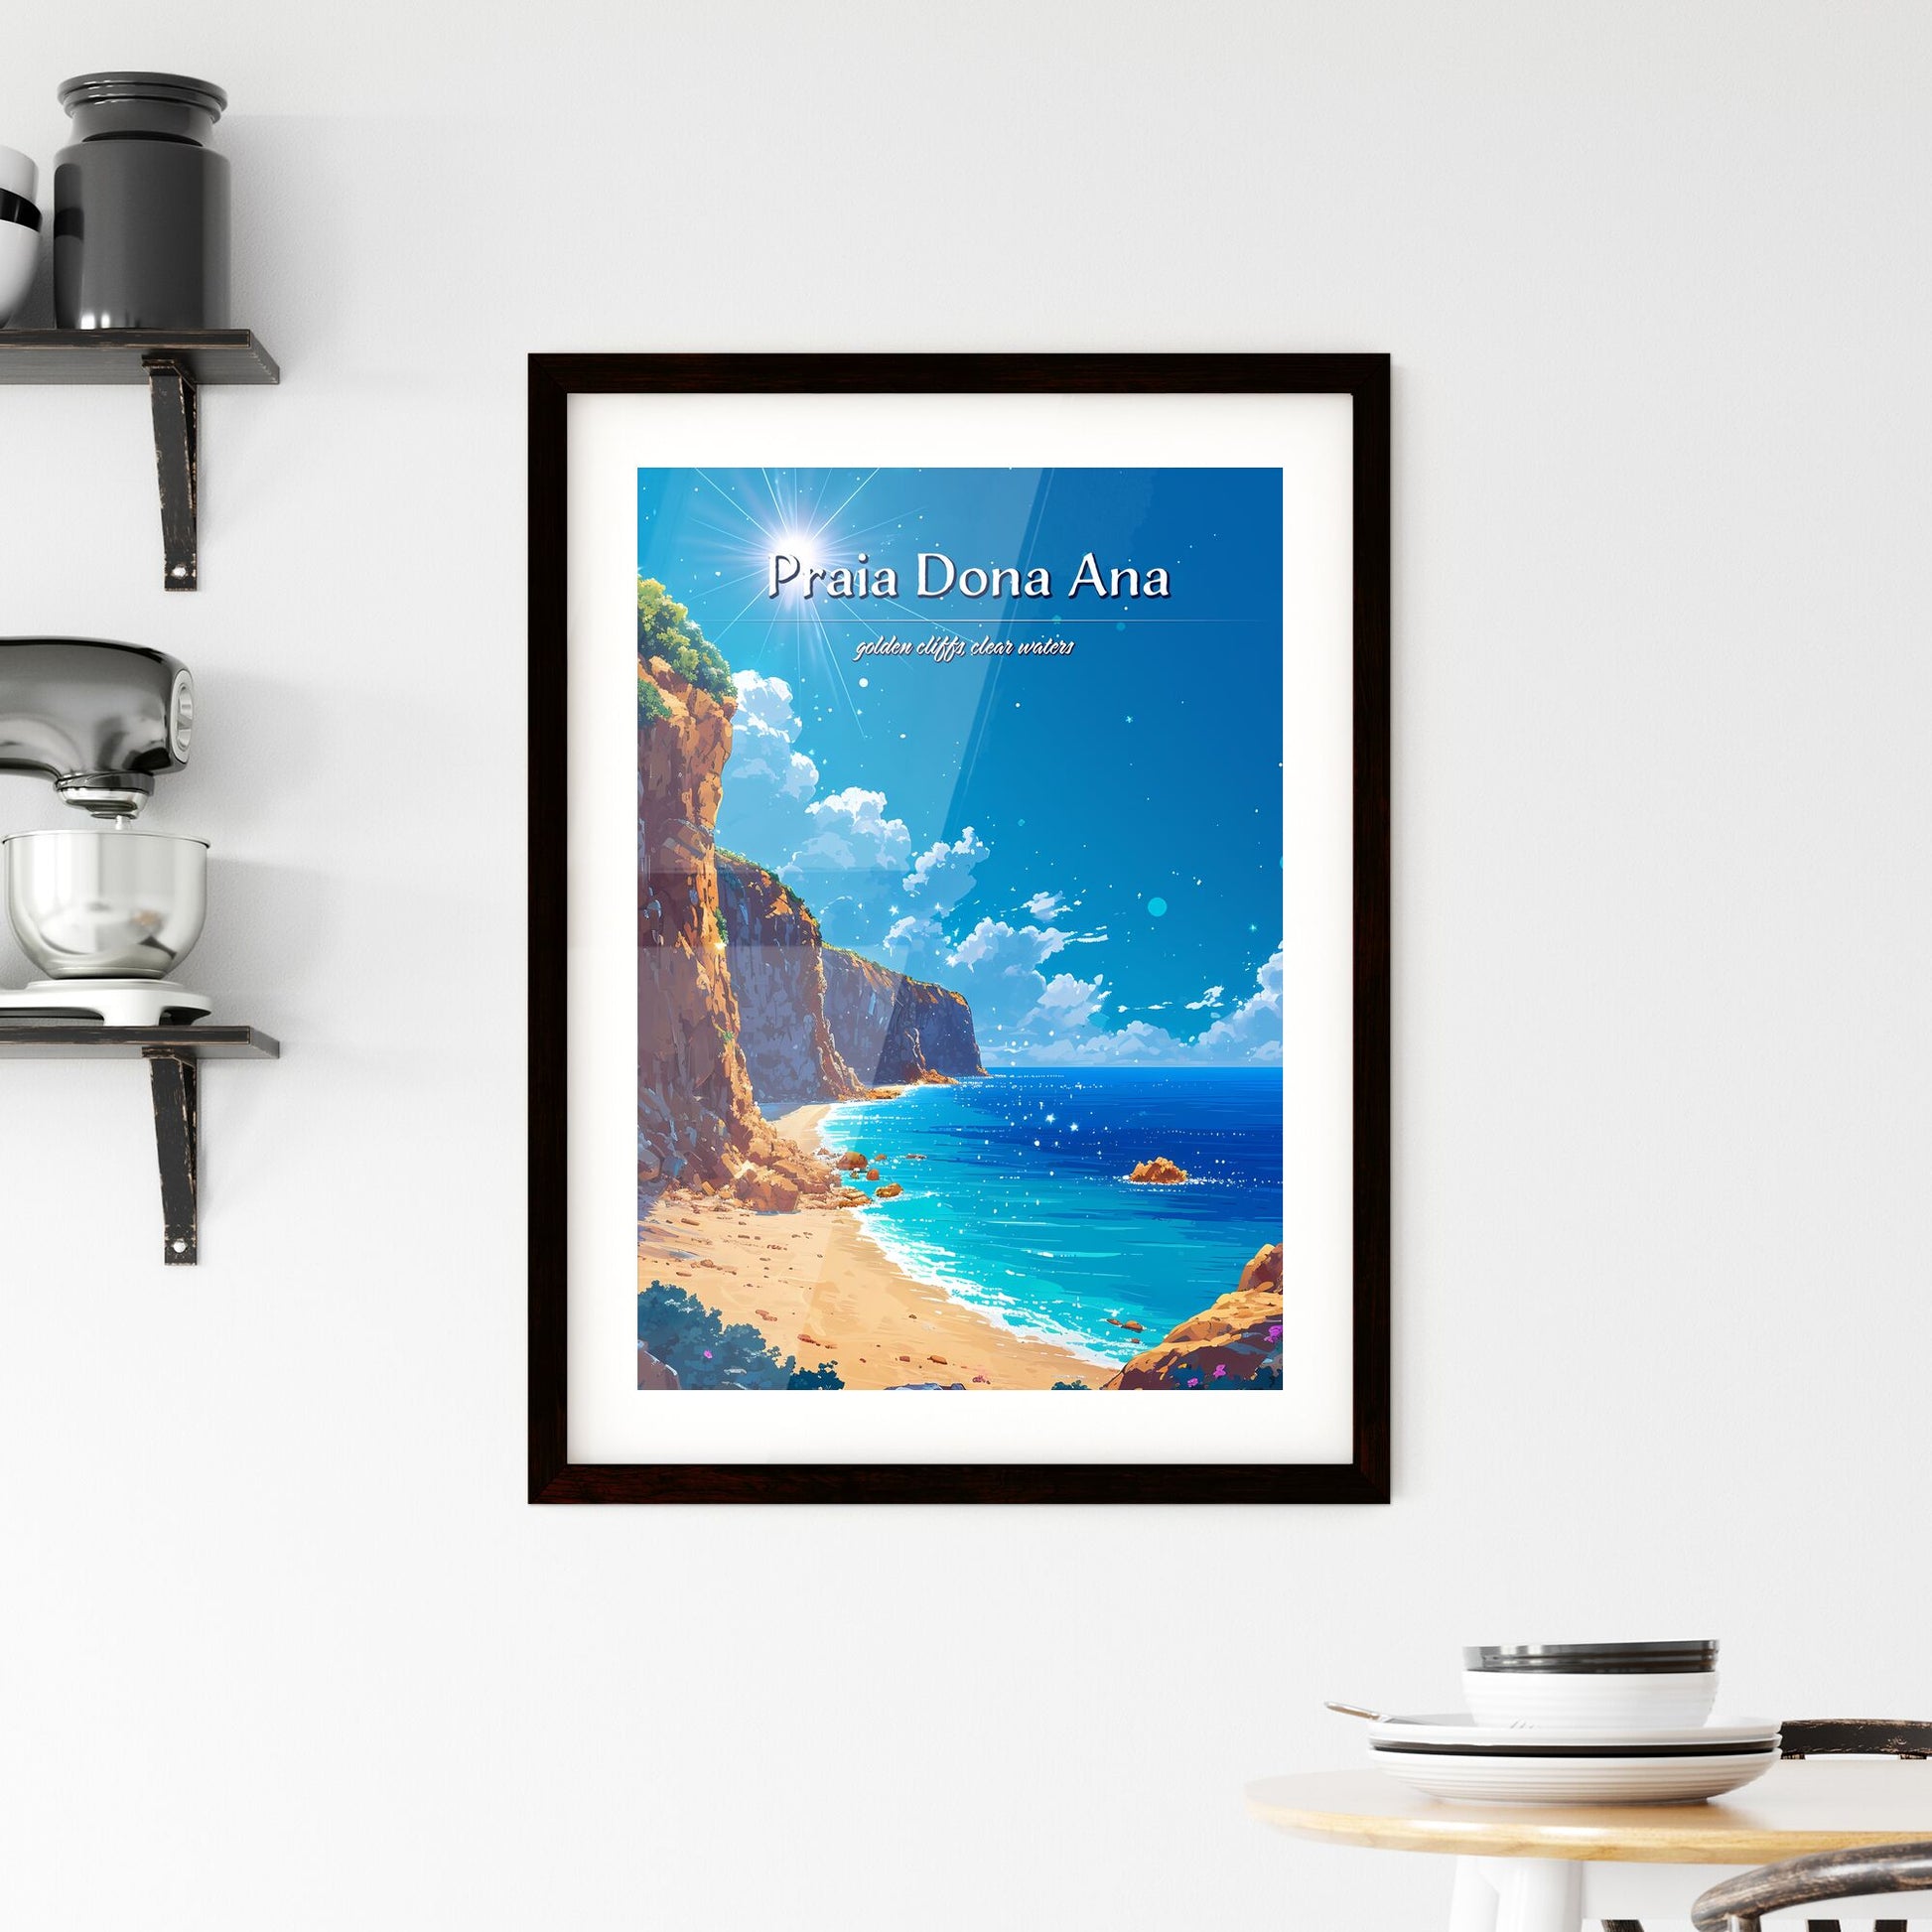 Praia Dona Ana Beach - Art print of a beach with rocks and a body of water Default Title